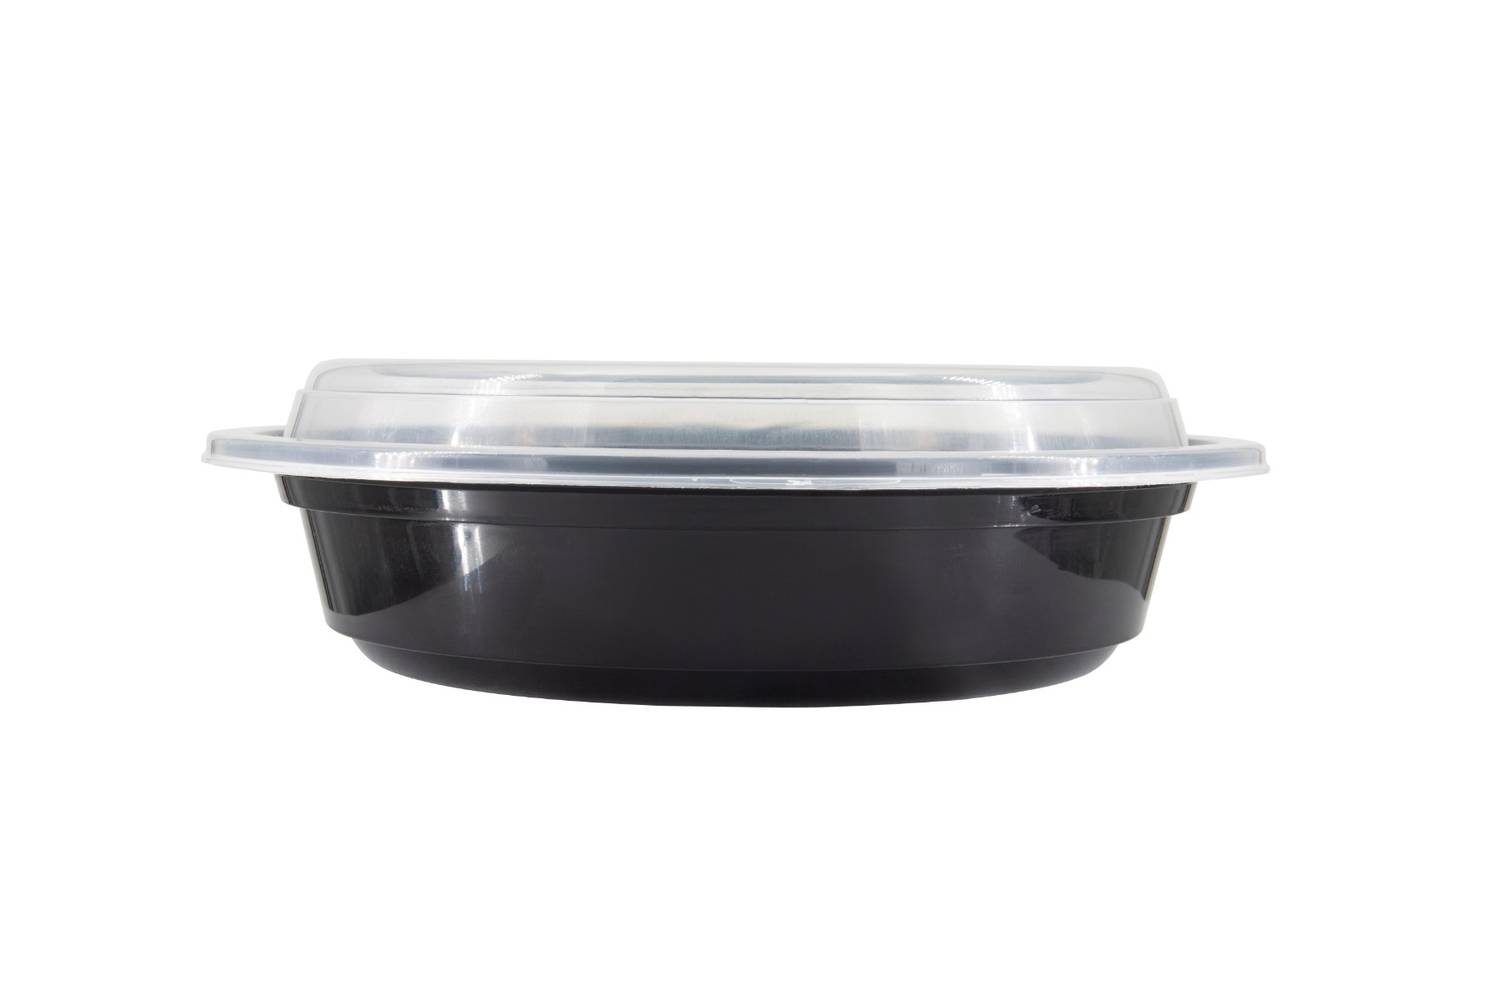 Hot Pack - 6" Round Microwavable Container, Black with Clear Lid, 16 oz capacity - 150ct (1X150|1 Unit per Case)